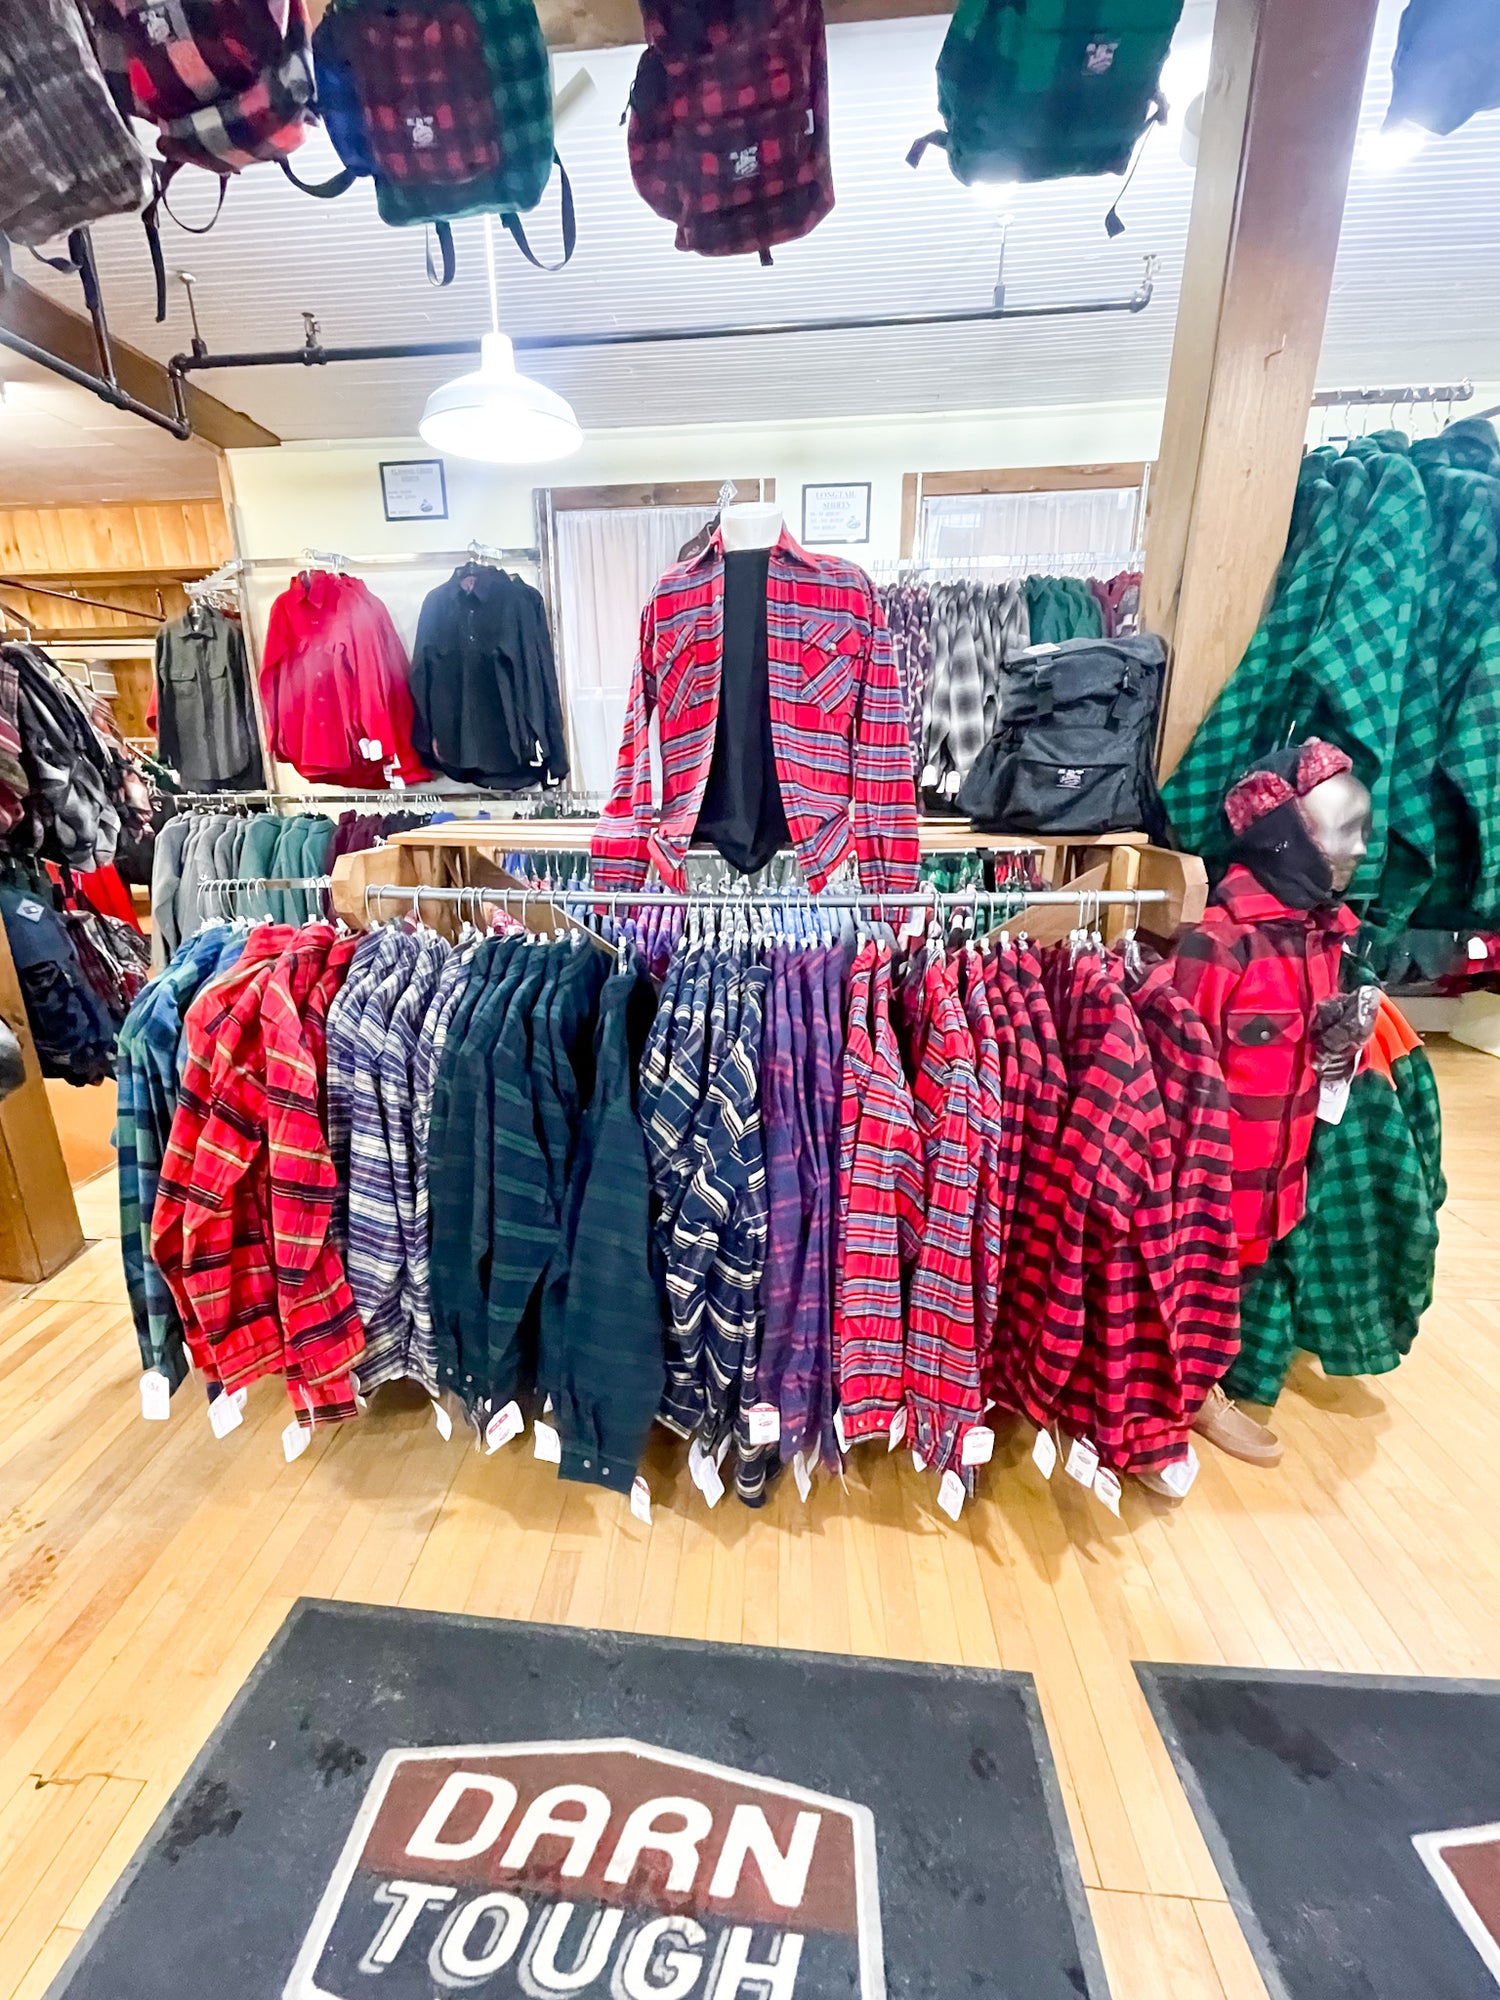 Store photo of various flannel shirts on rack, with darn tough floor mat